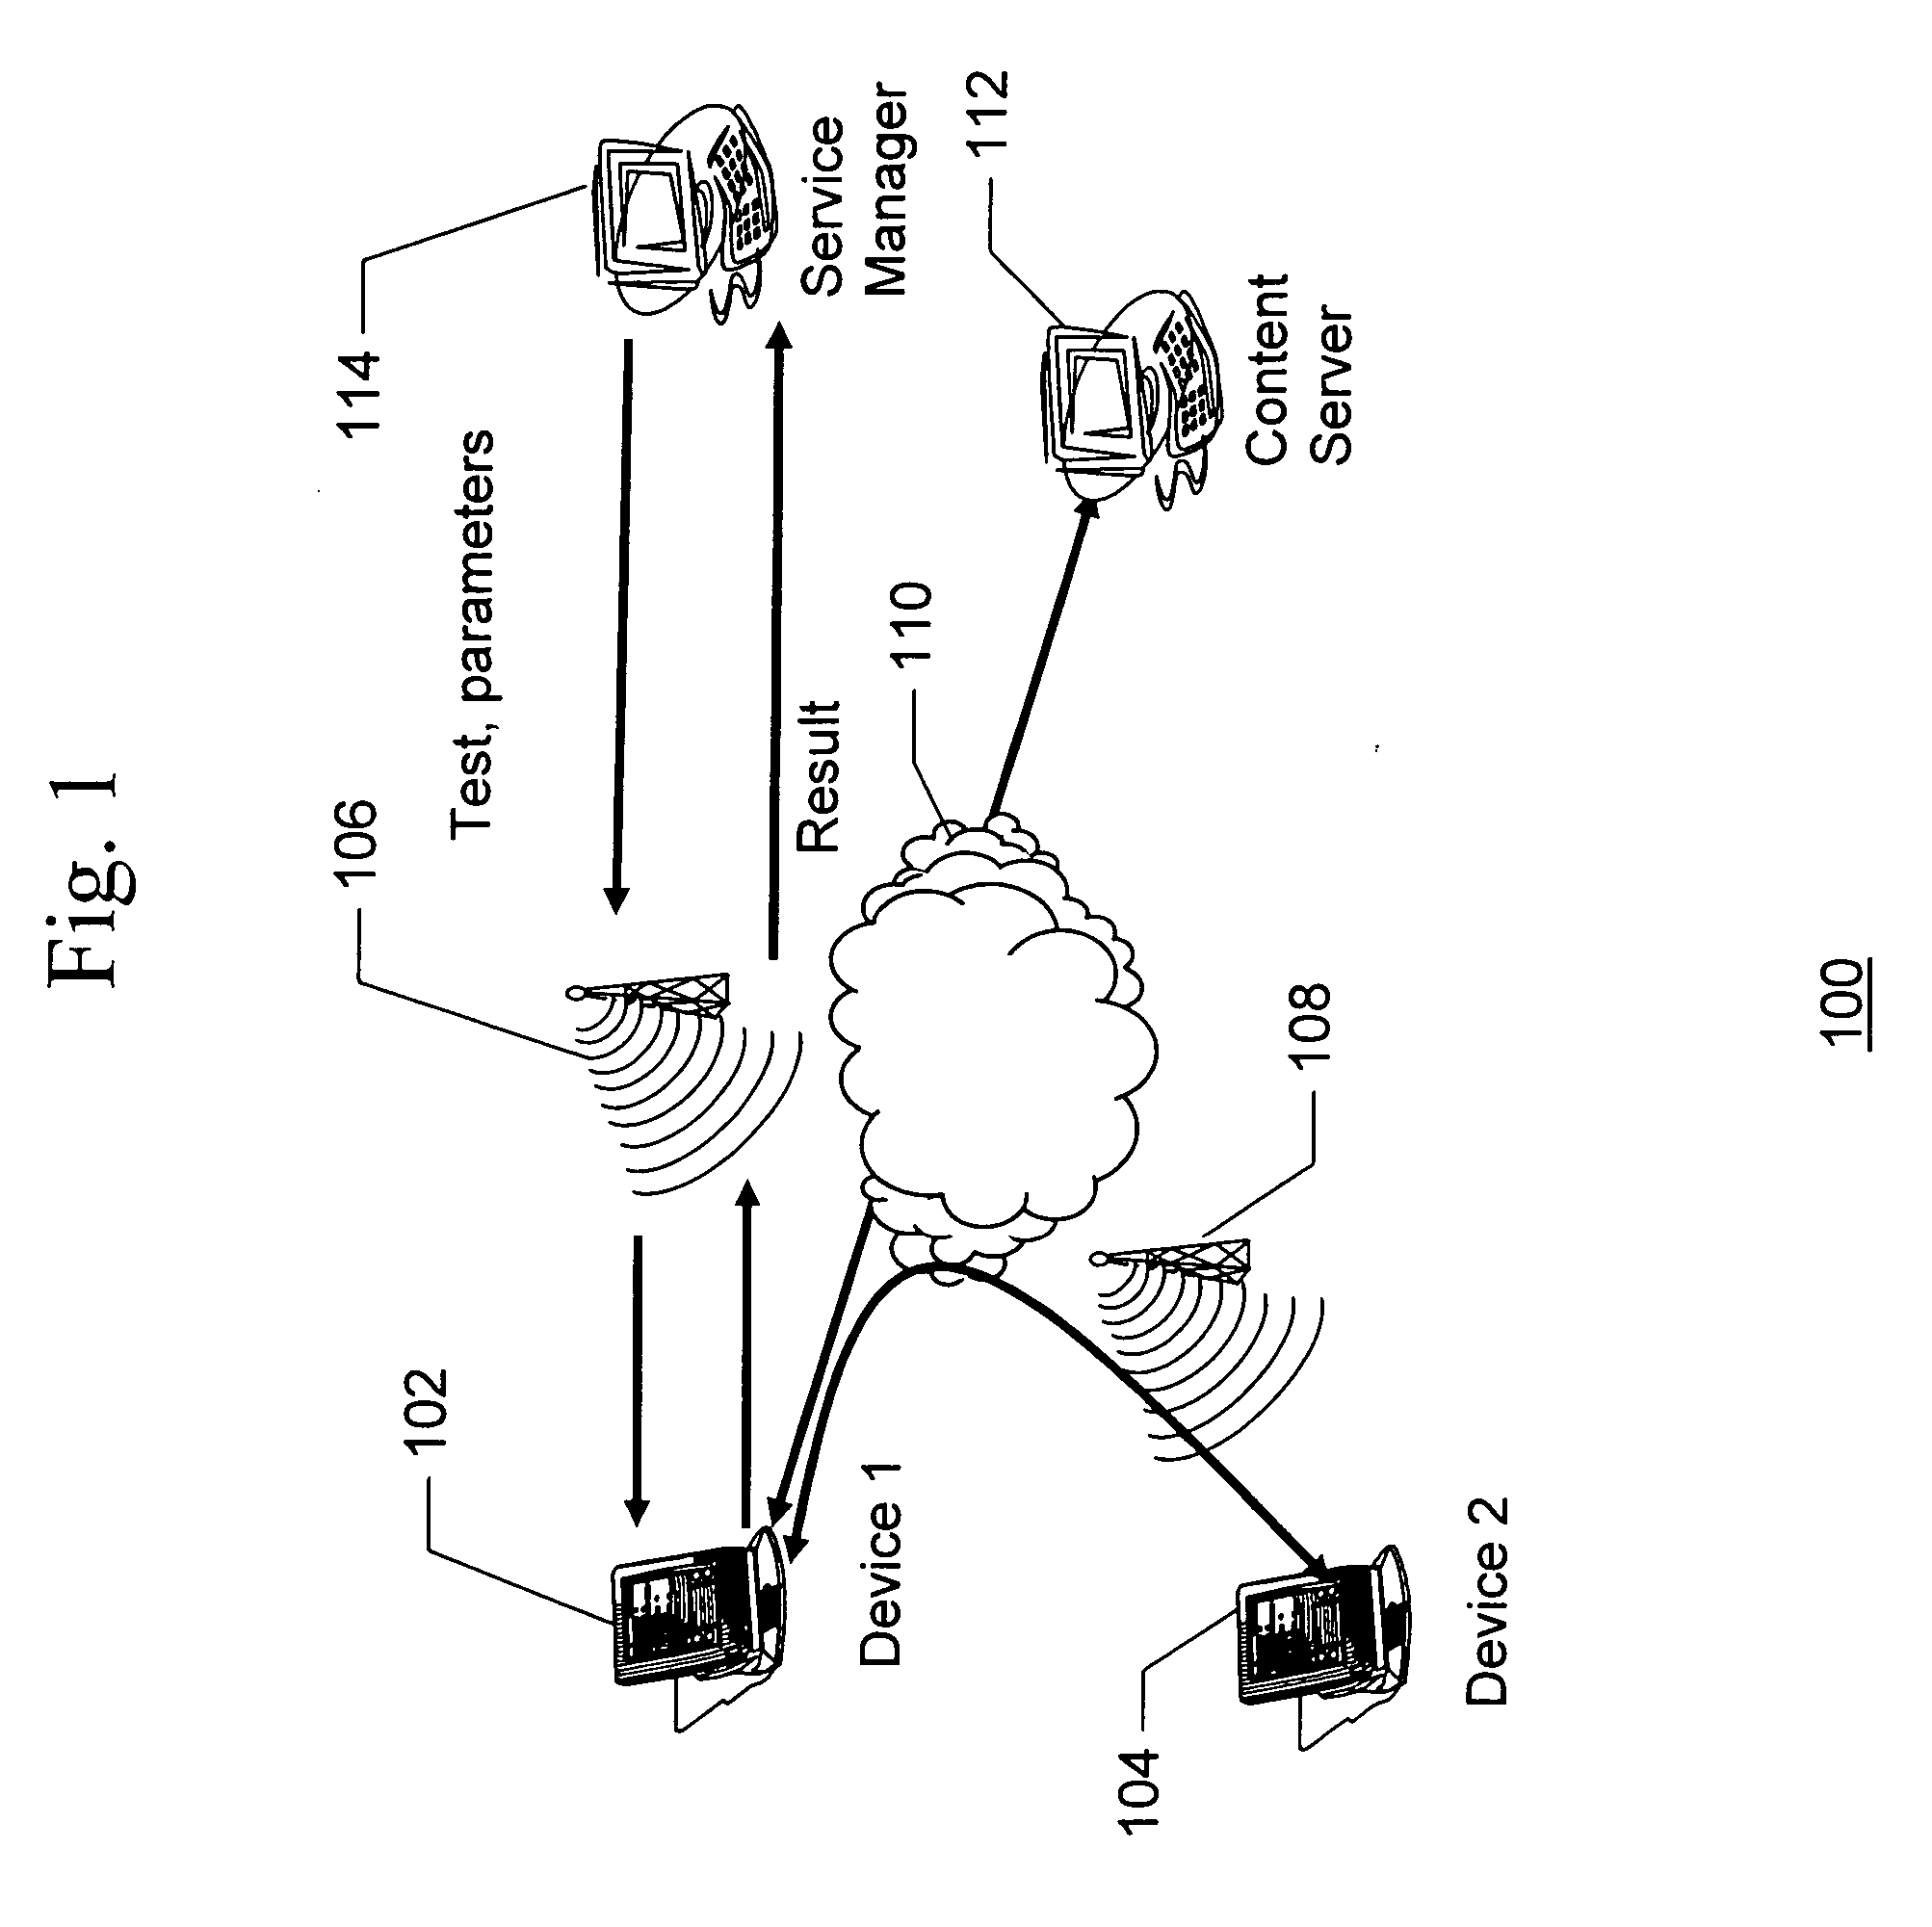 System and method for monitoring and measuring end-to-end performance using wireless devices